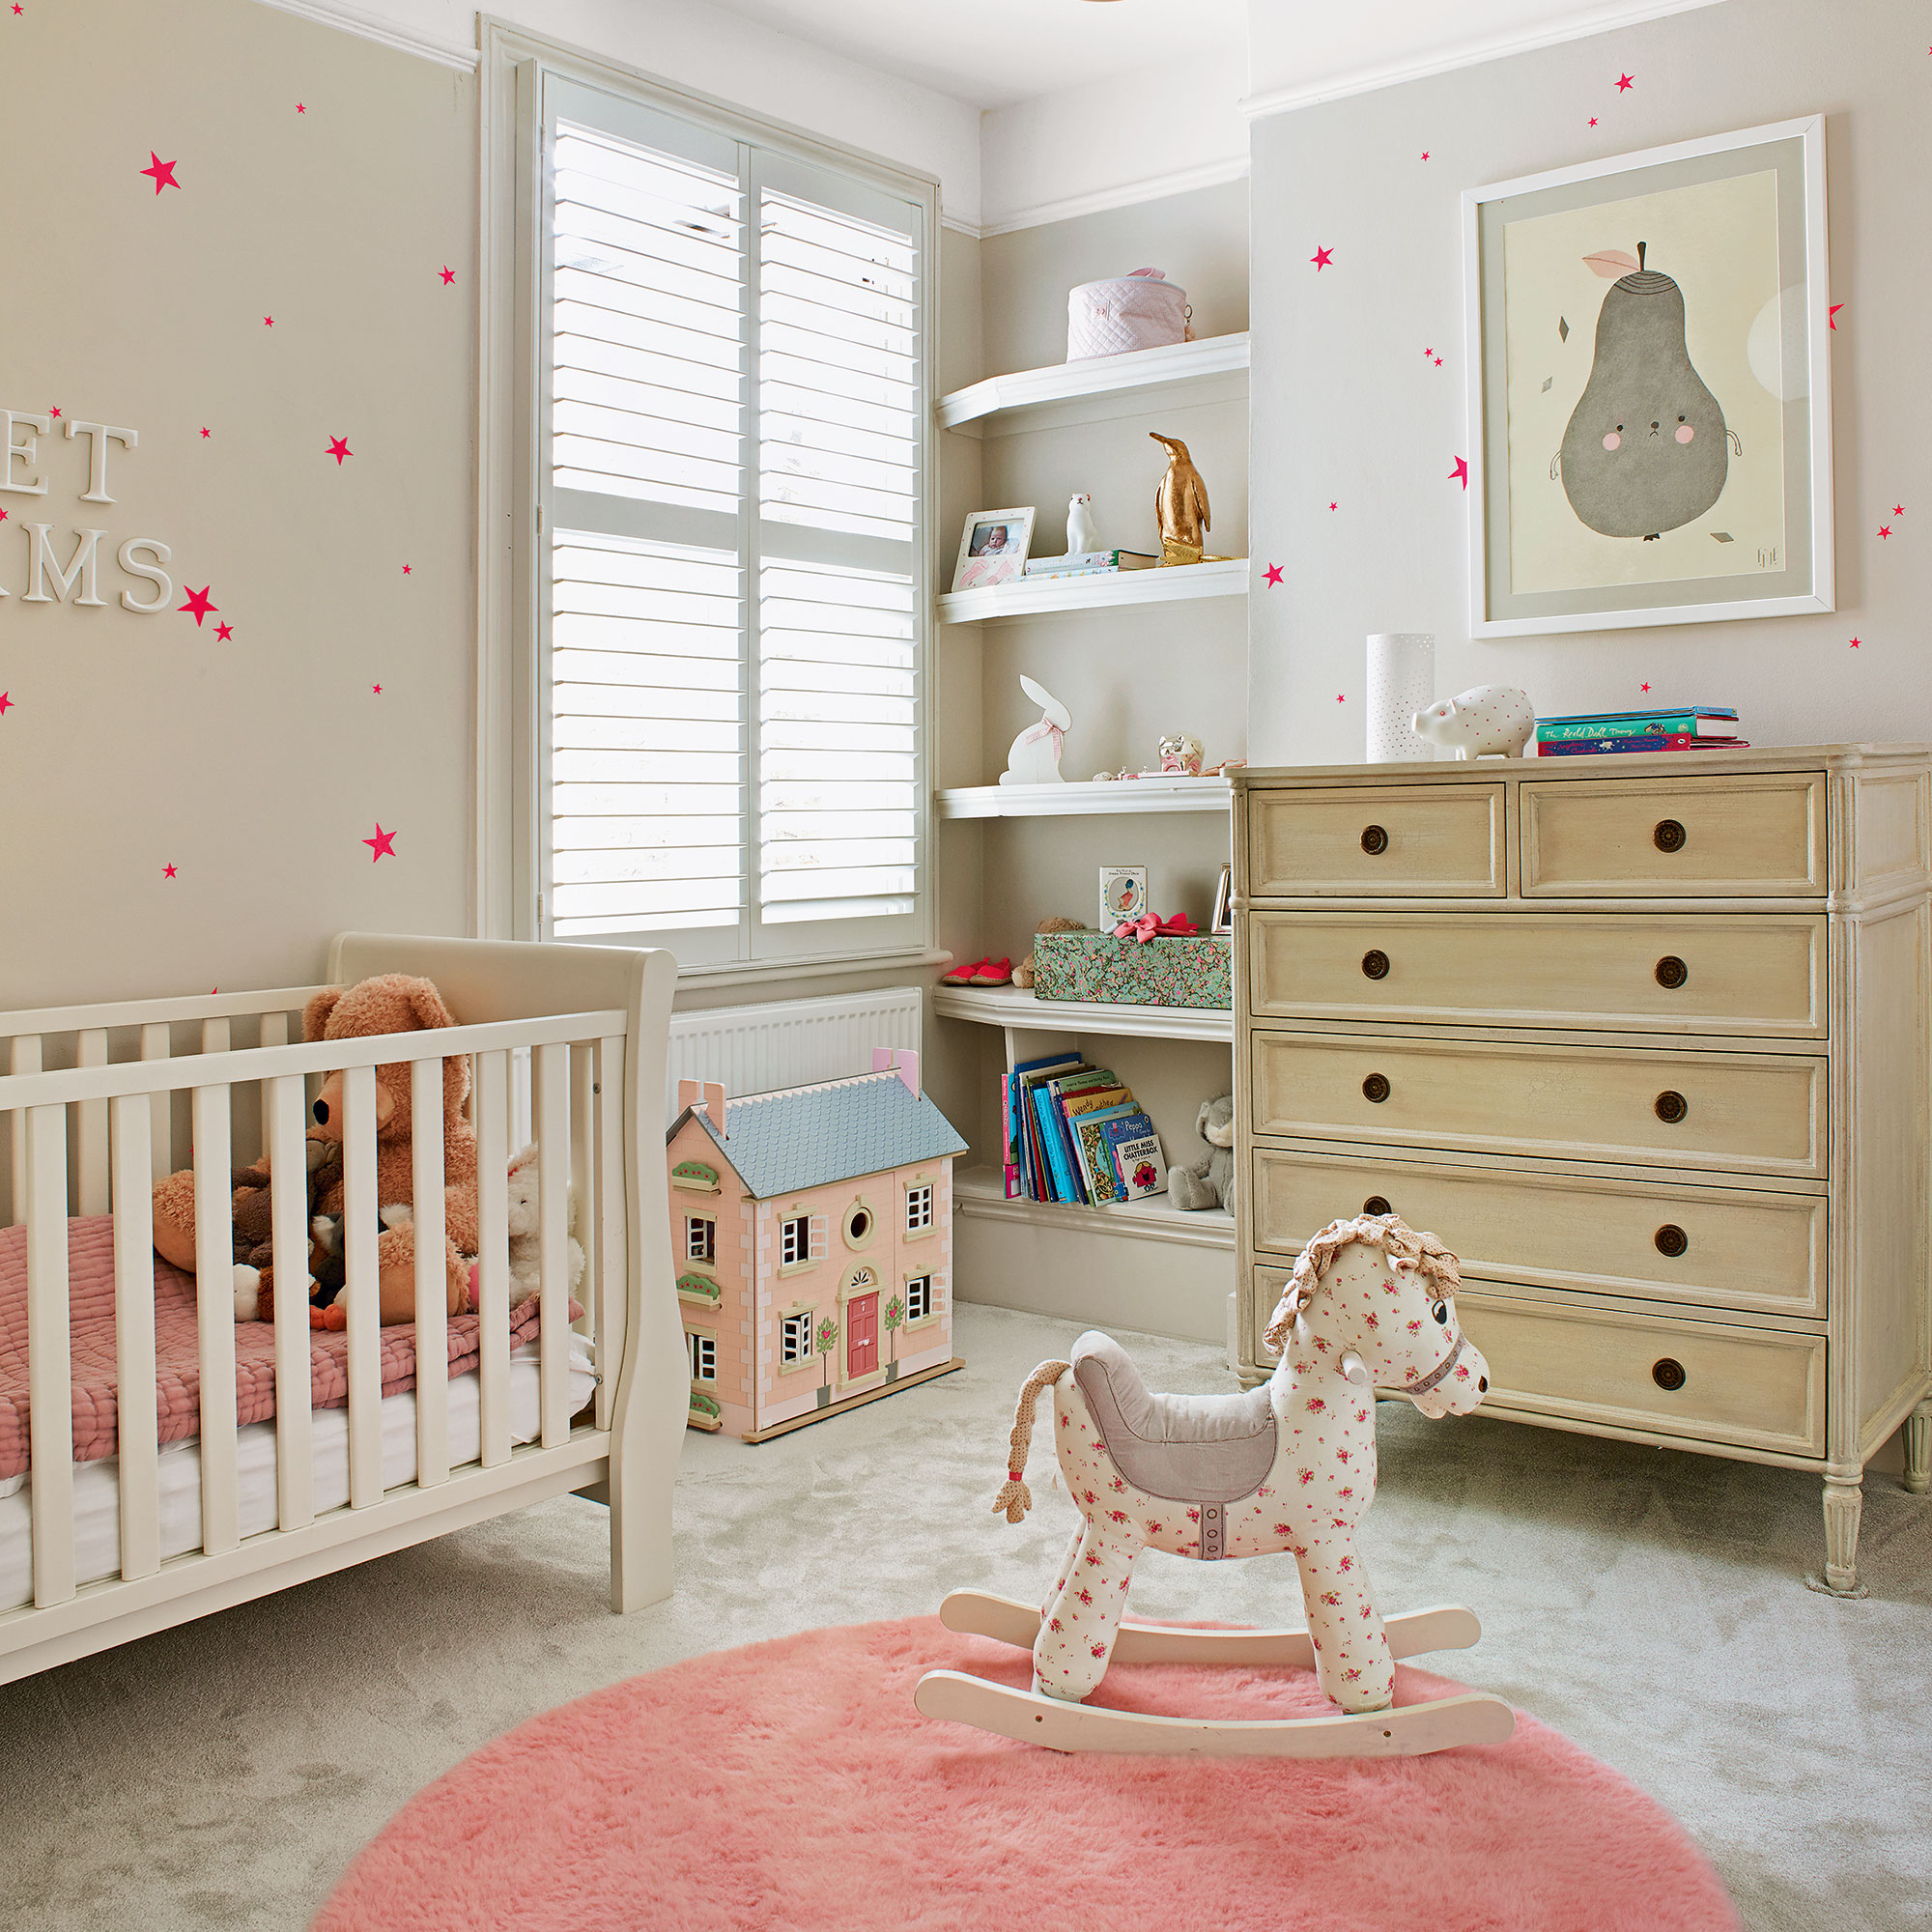 White, grey and pink nursery with bright pink stars on the wall and a round pink rug